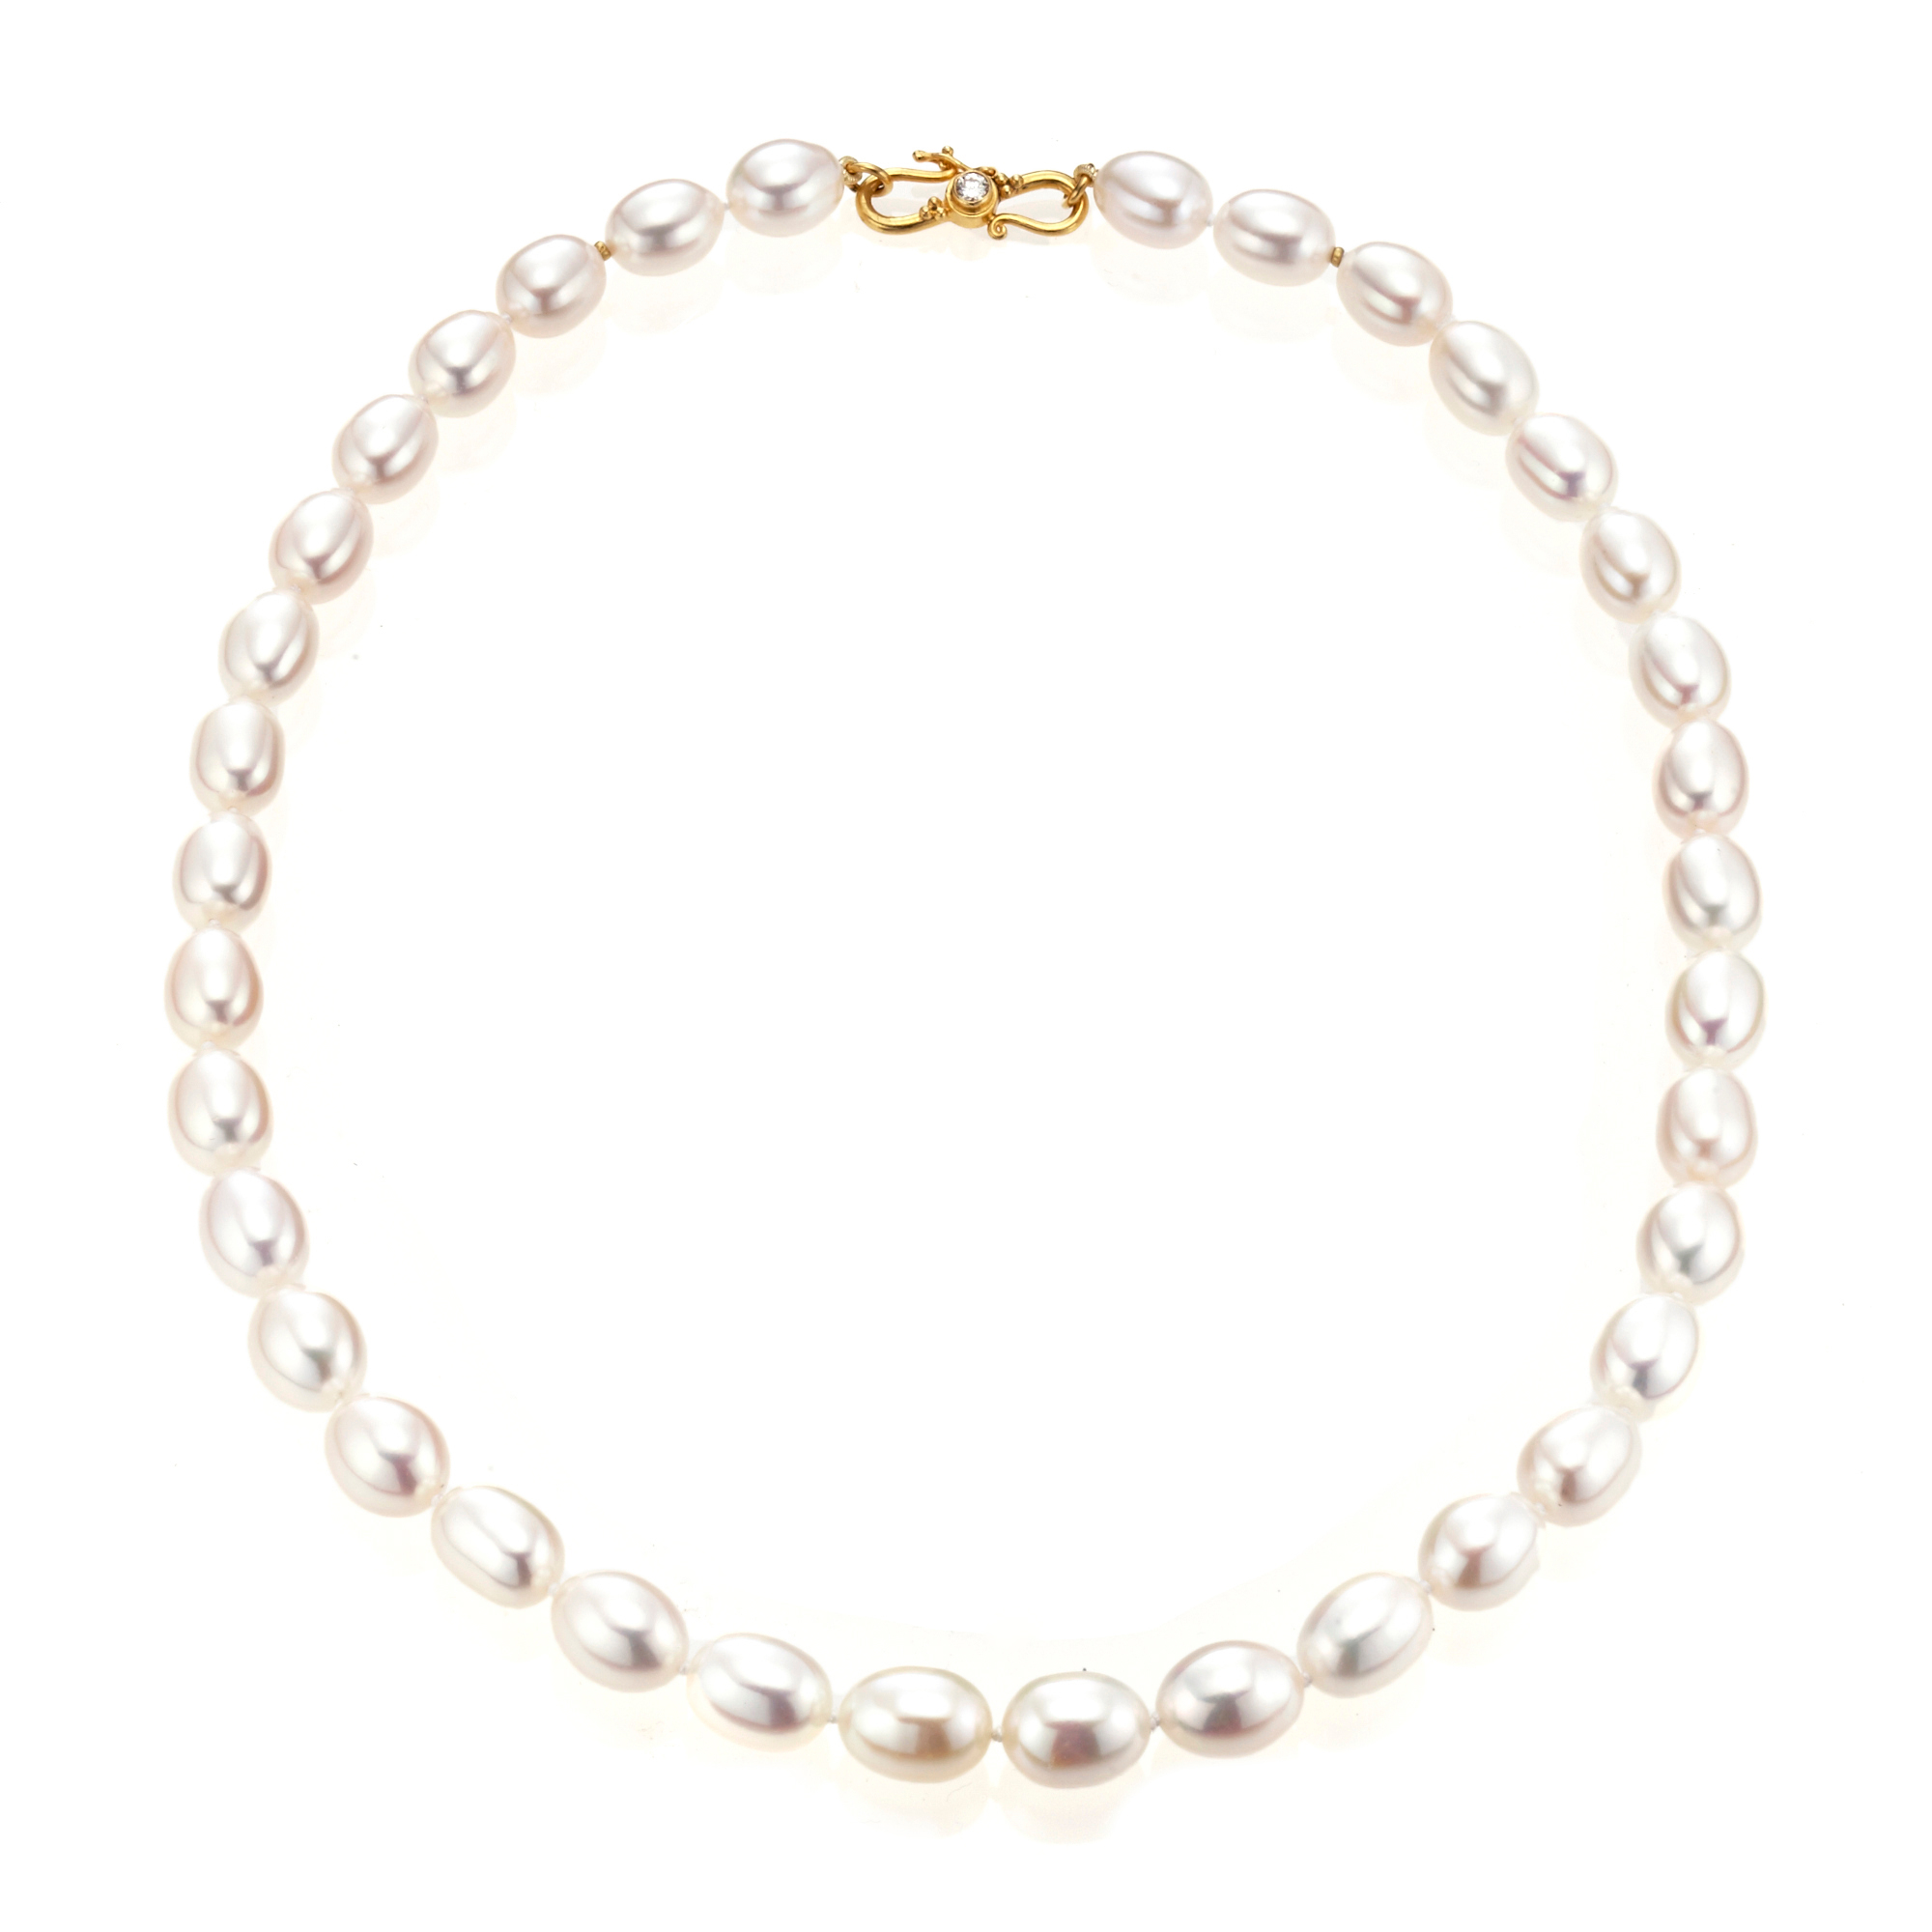 Gump's Baroque Pearl Necklace With Gold and Diamond Clasp | Gump's